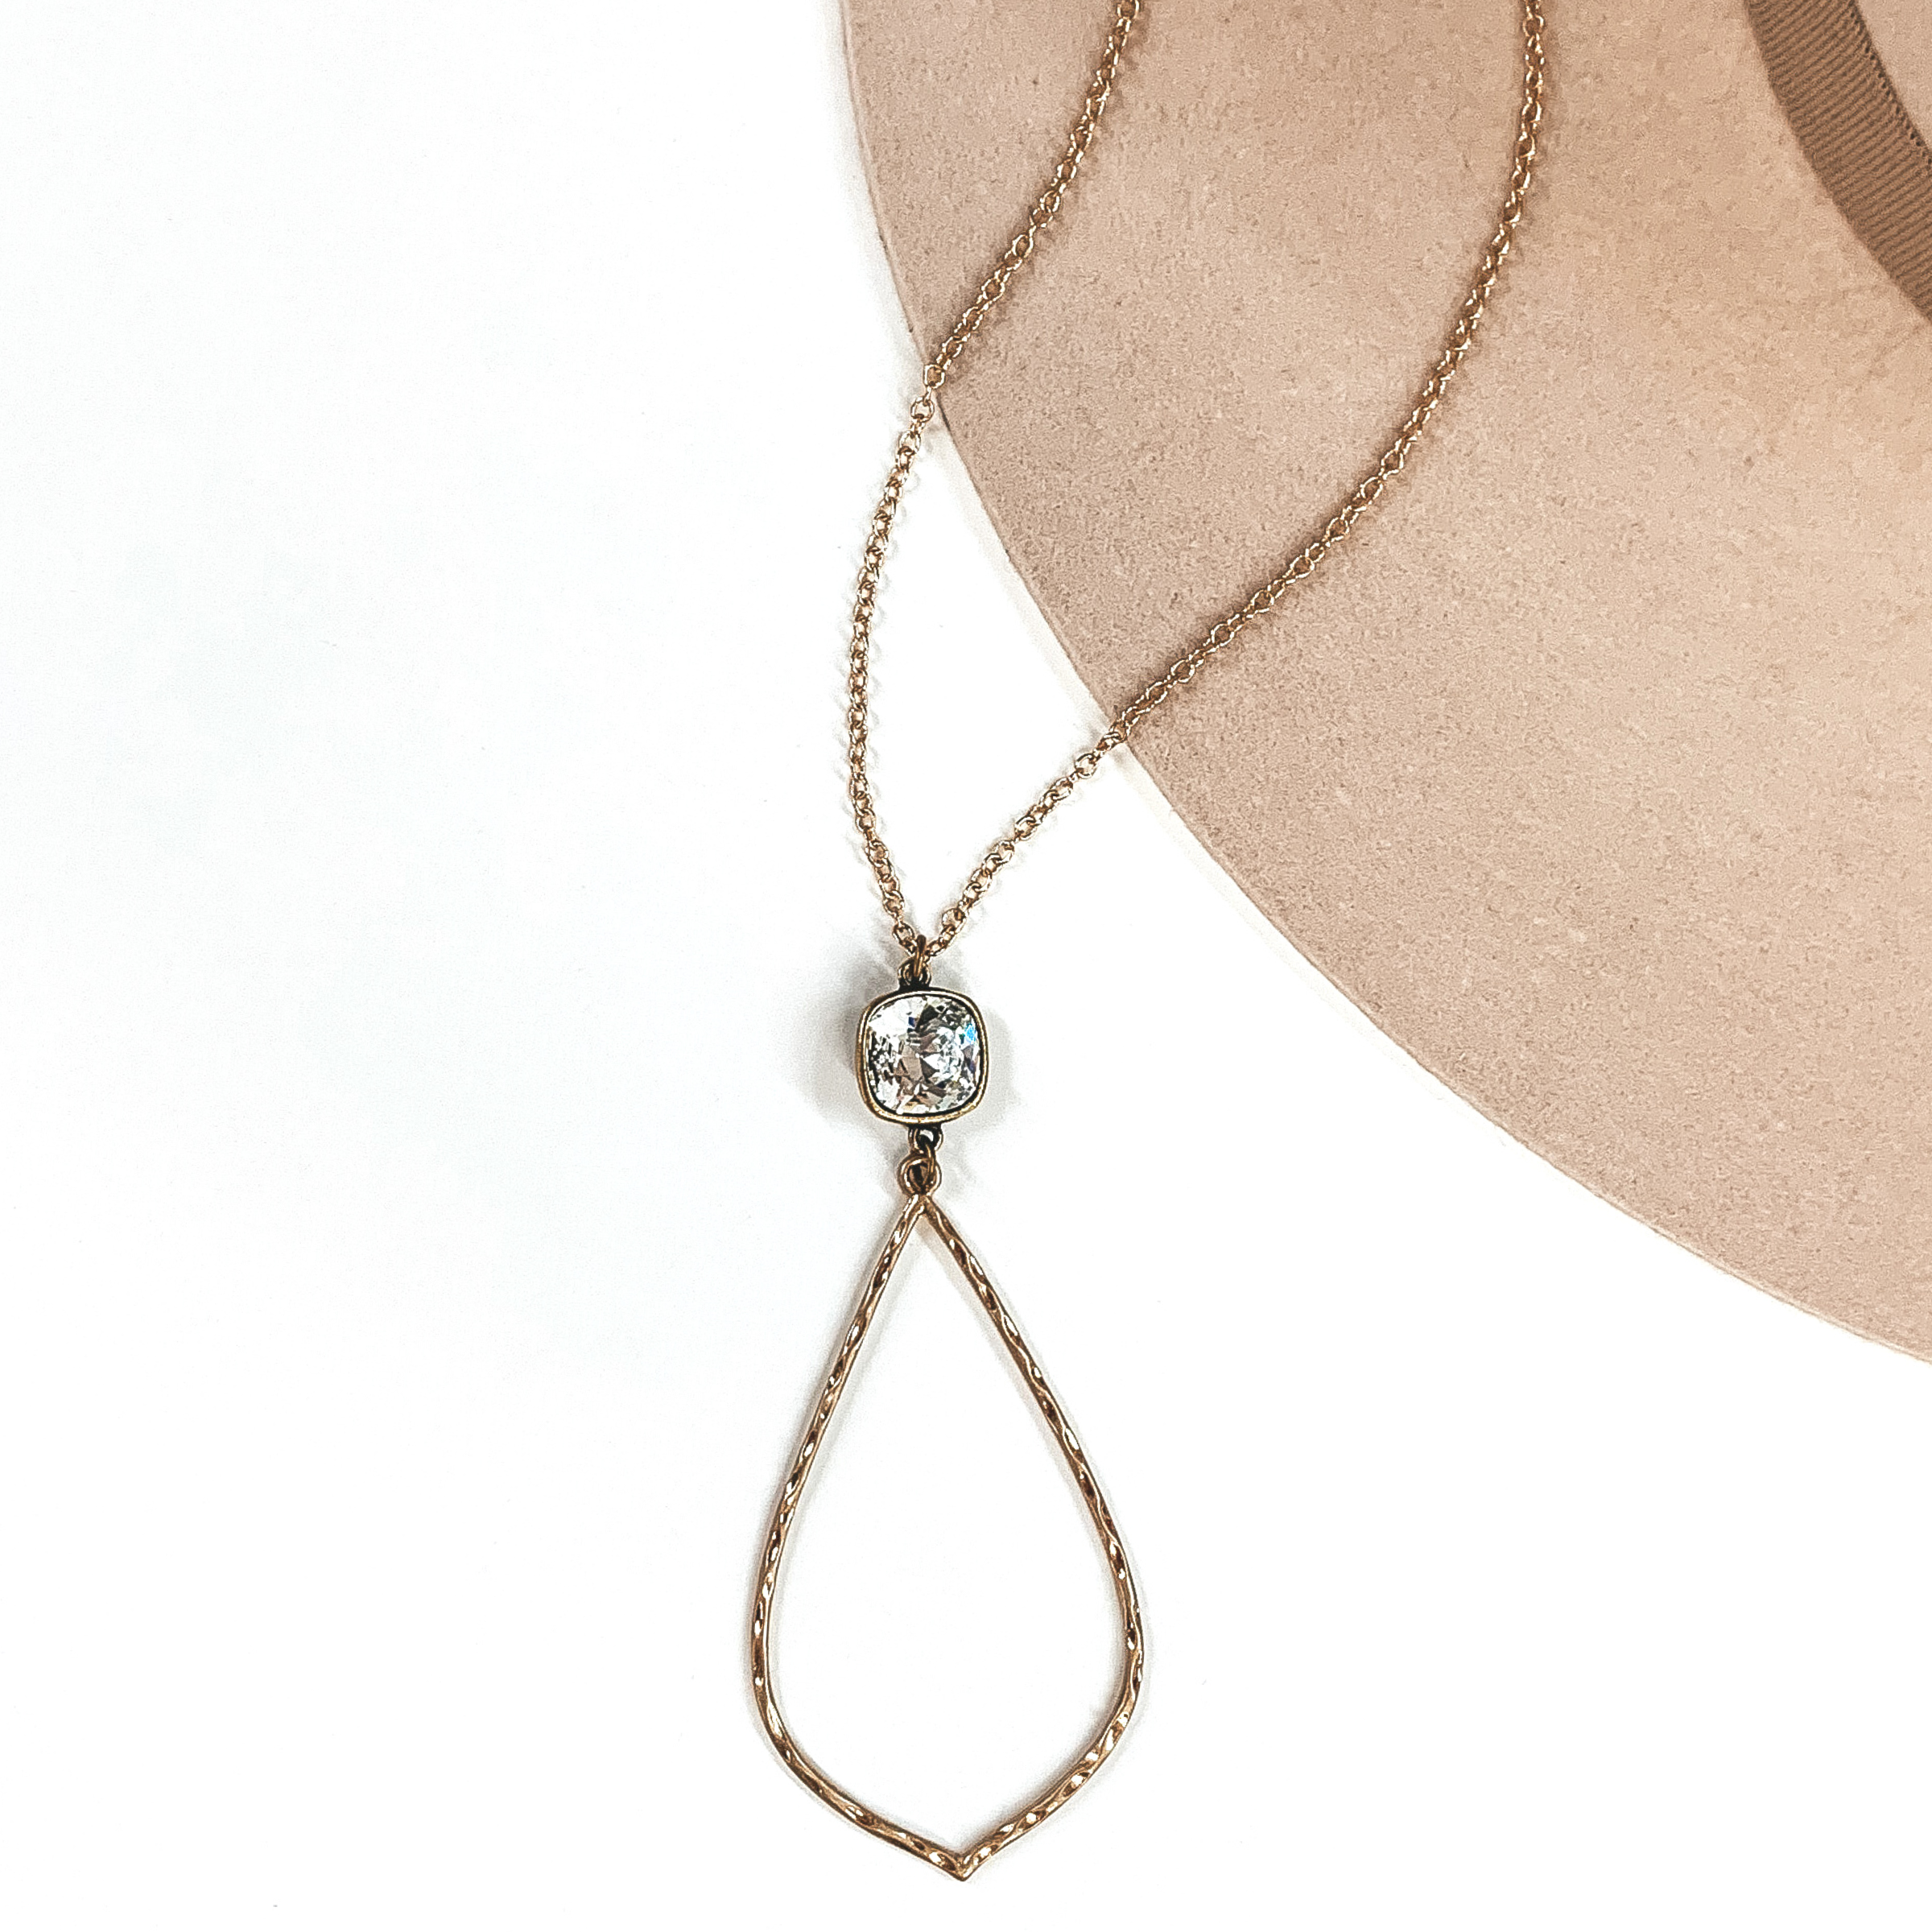 Small gold chained necklace with hanging clear cushion cut crystal and thin hammered teardrop pendant. This necklace is pictured on a white and beige background.